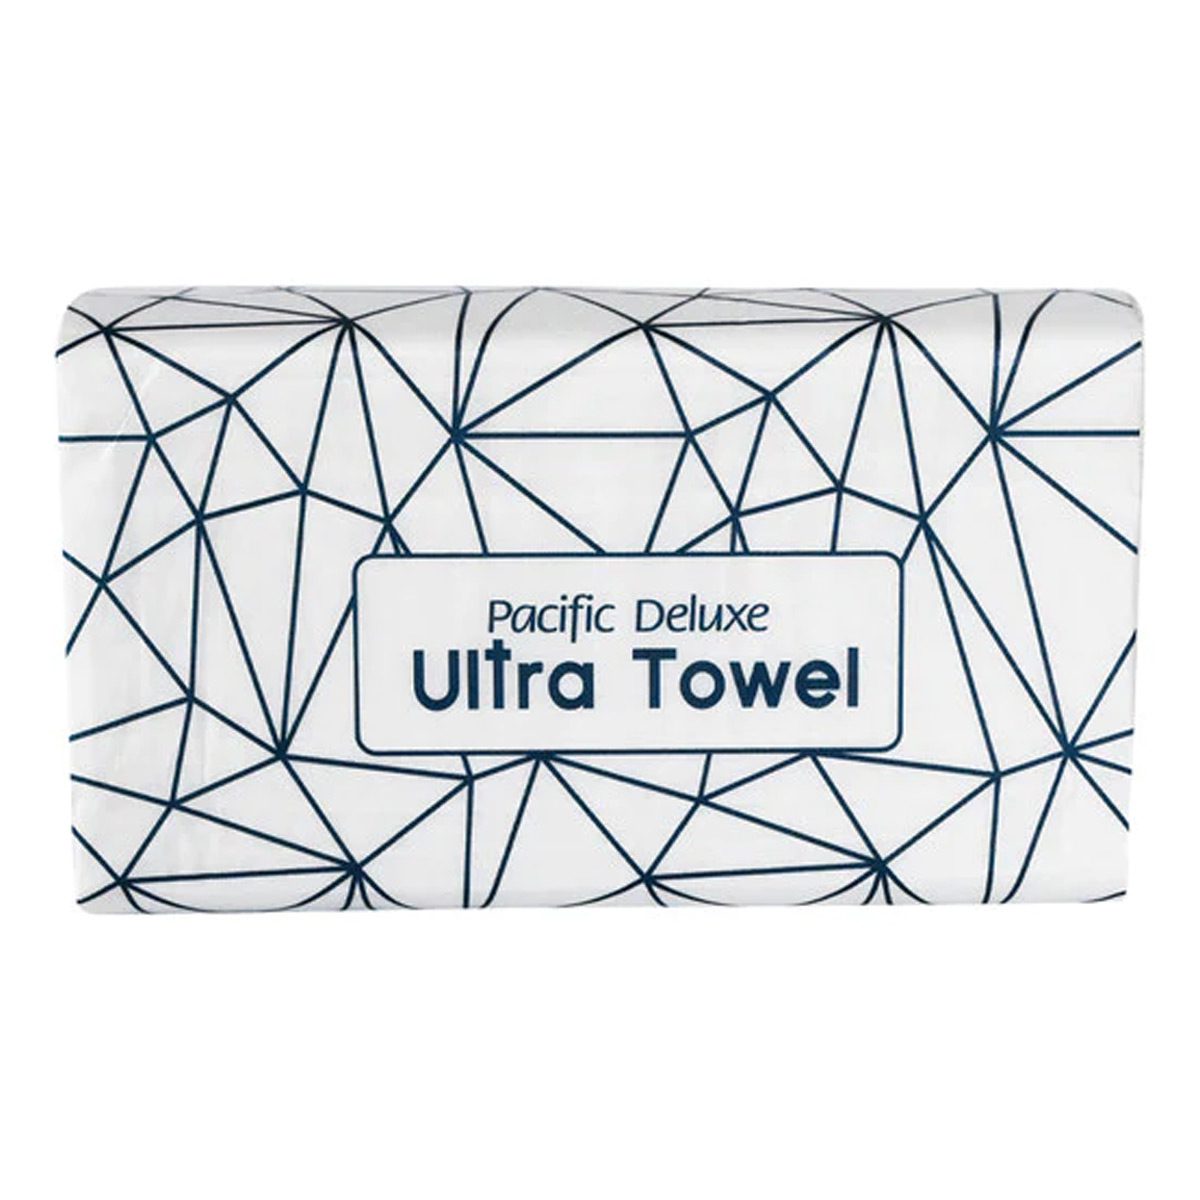 paper-products-paper-towels-ultra-deluxe-white-s/fold-paper-towels-highly-absorbent-superior-towel-better-drying-performance-interleaved-sheets-reduce-wastage-vjs-distributors-phud-200